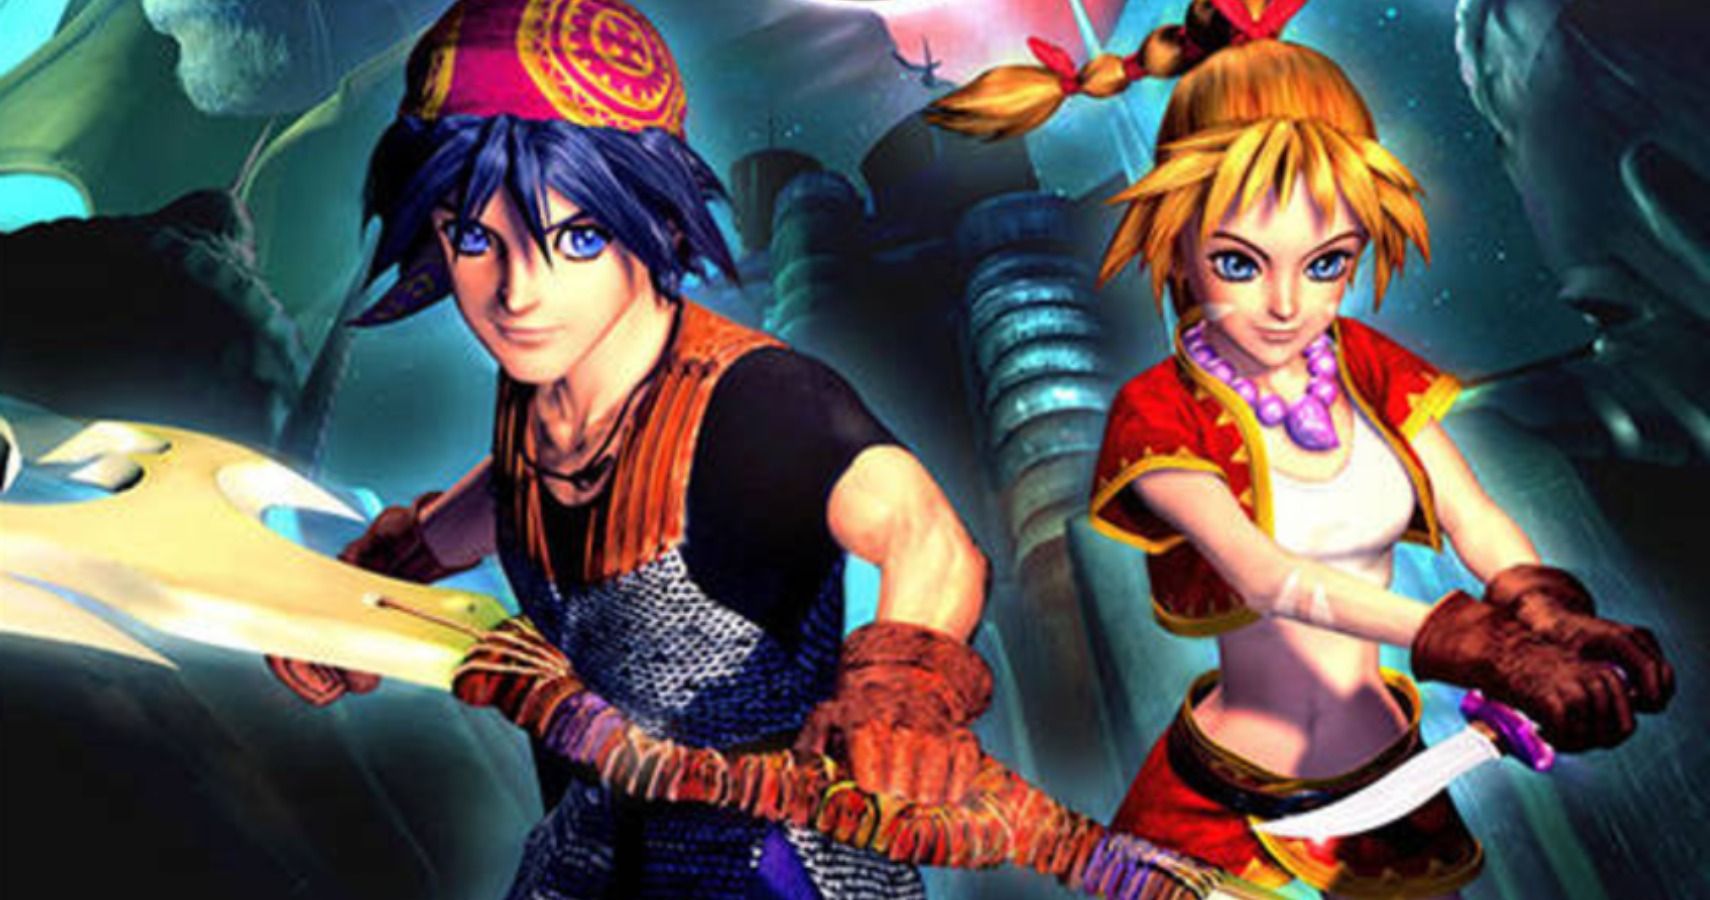 chrono-cross-not-chrono-trigger-is-reportedly-getting-a-remake